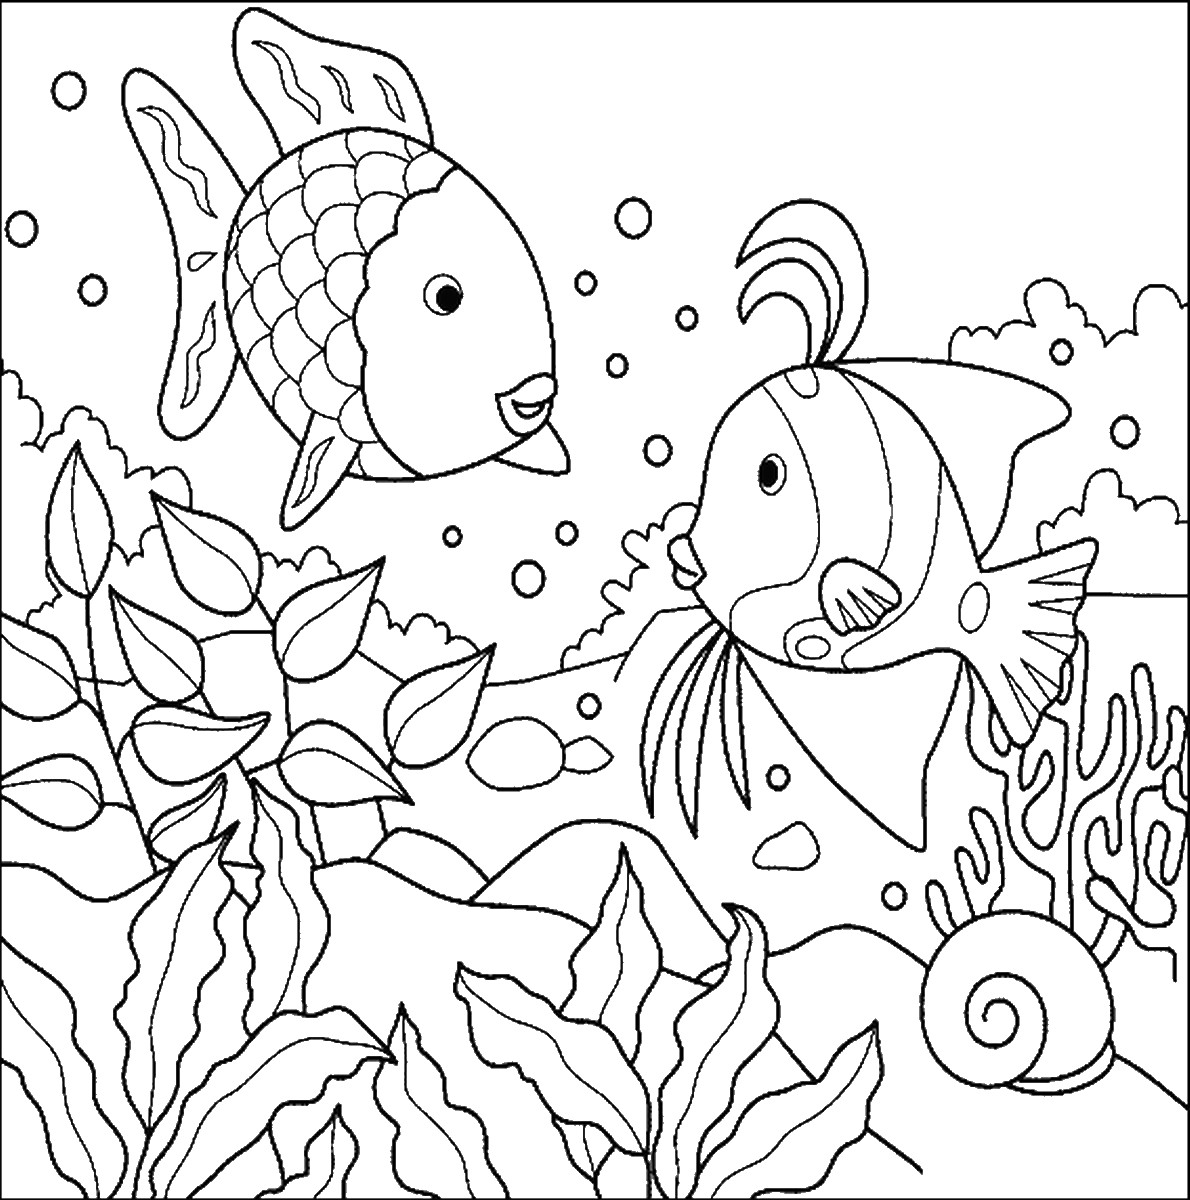 Coloring Pages Of Fish
 Fish Coloring Pages